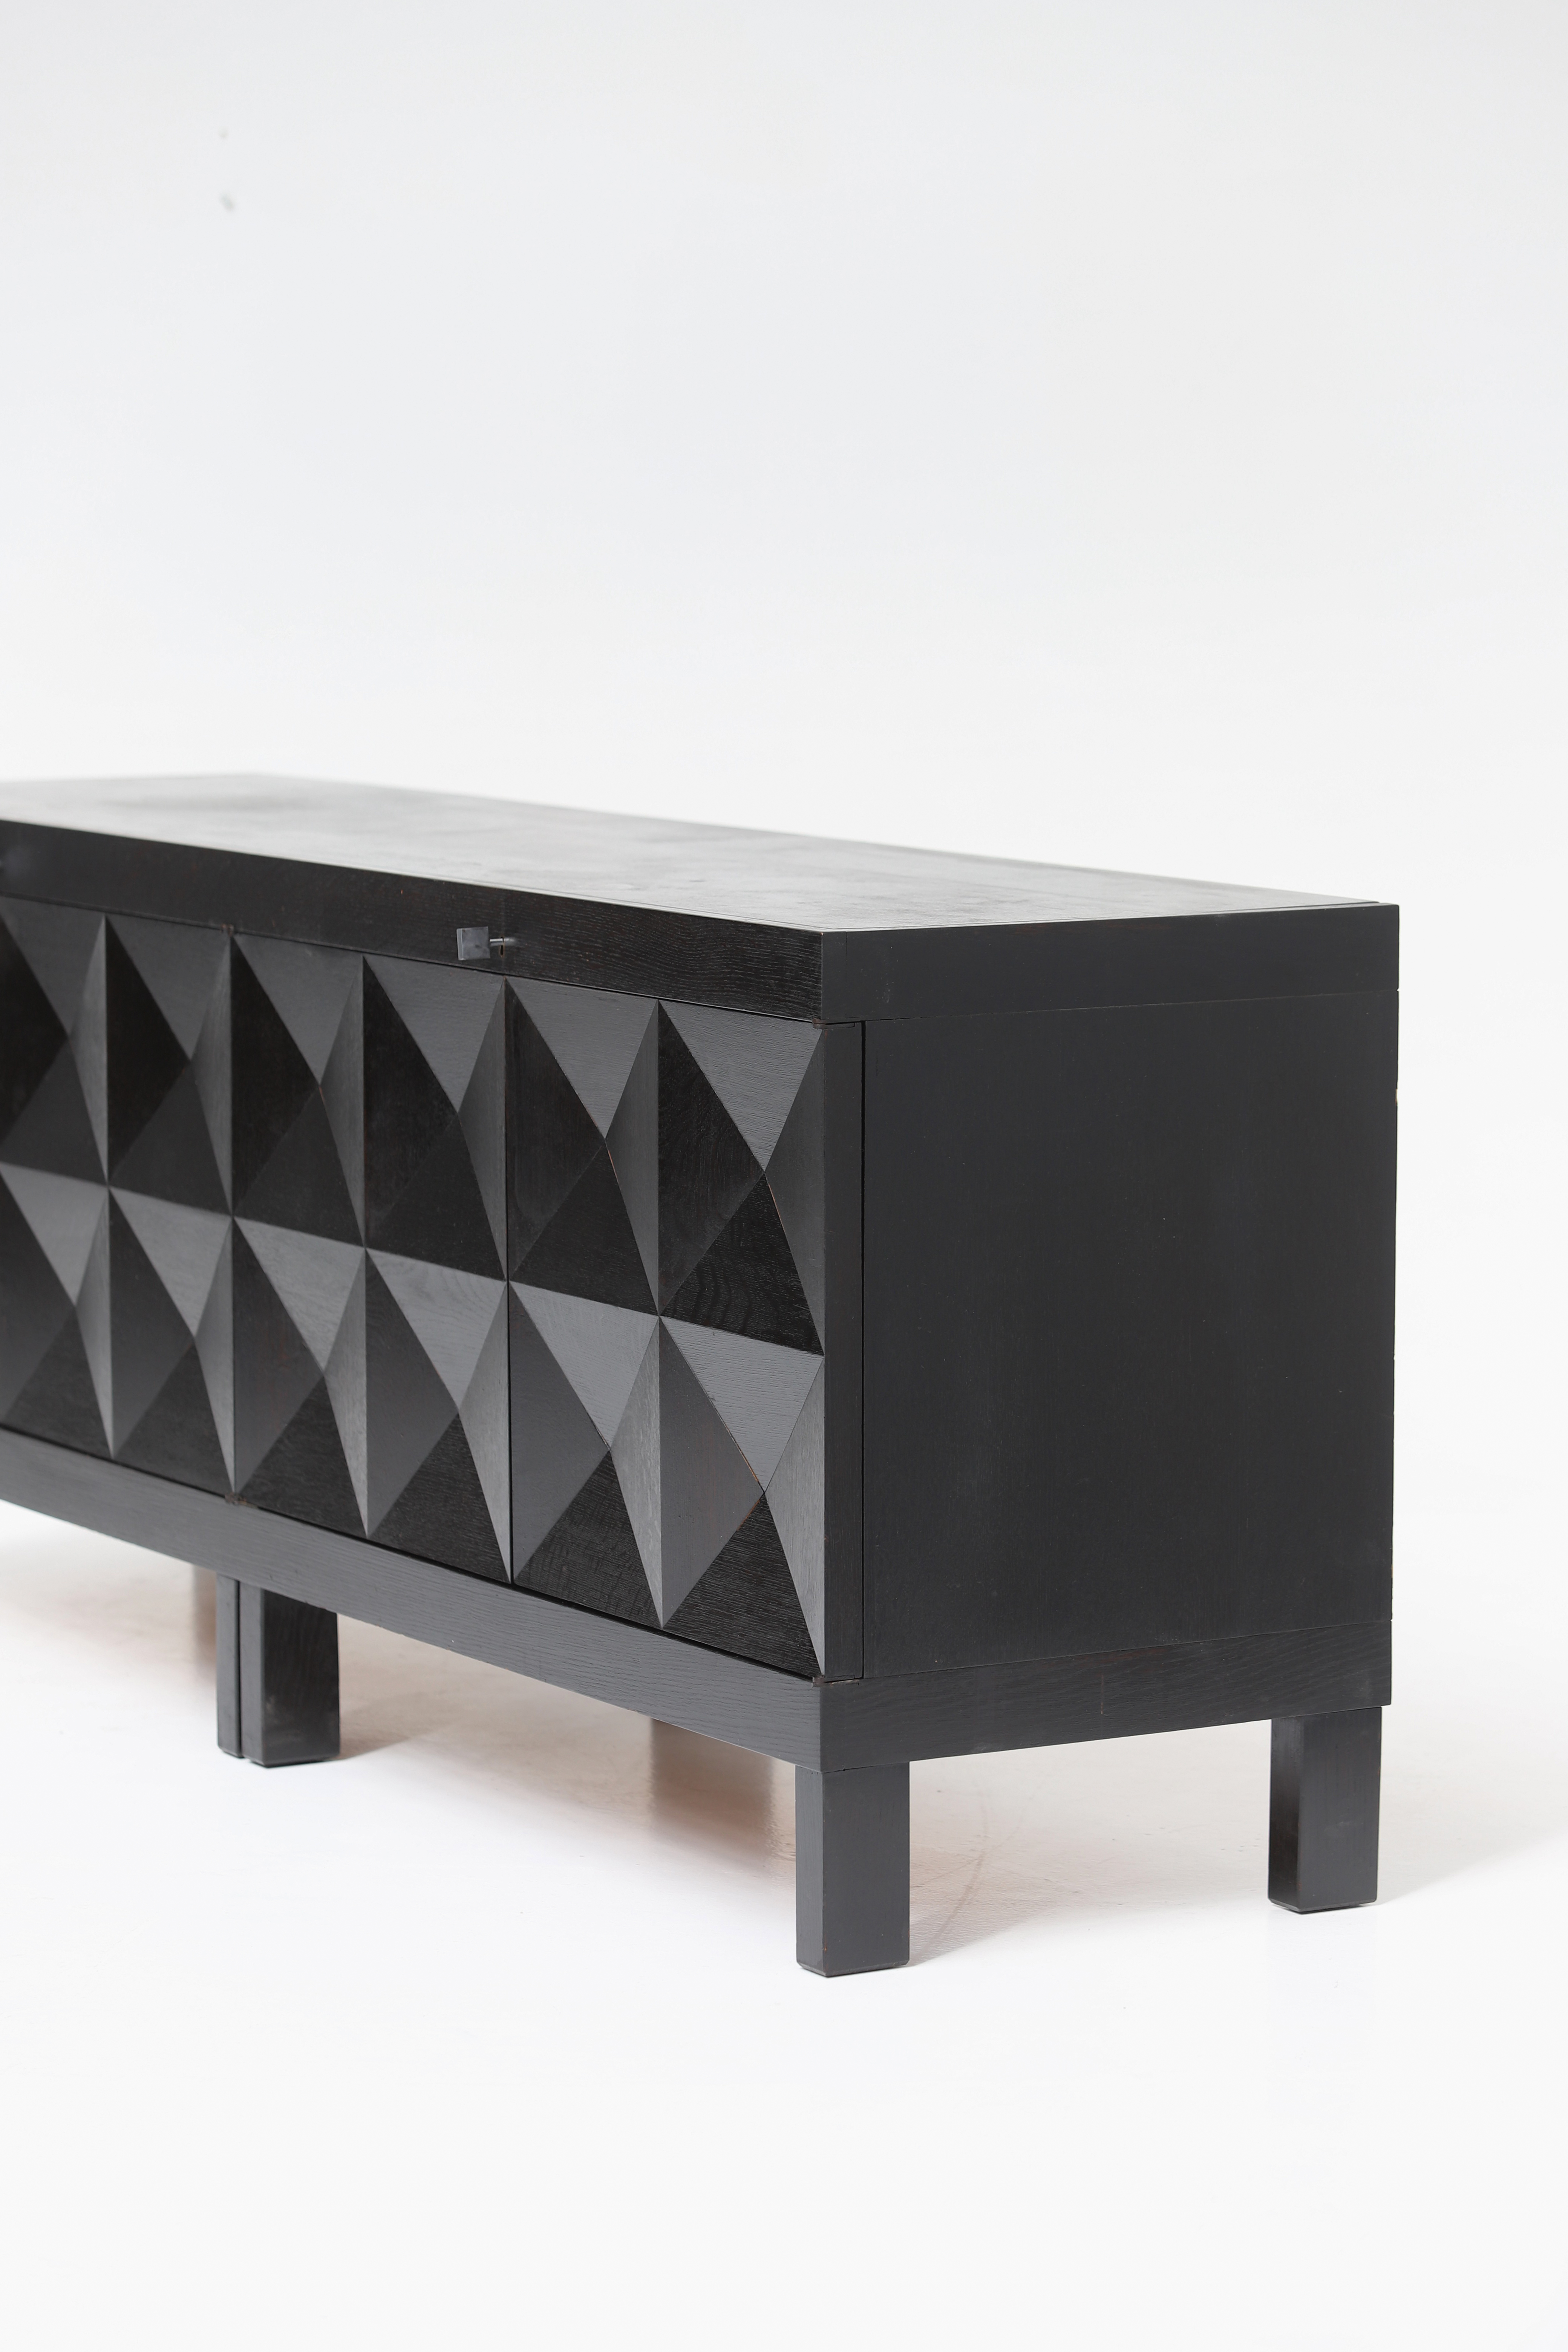 quality crafted sideboard with op-art doors designed by J. Batenburg for MI, Belgium 1969image 9